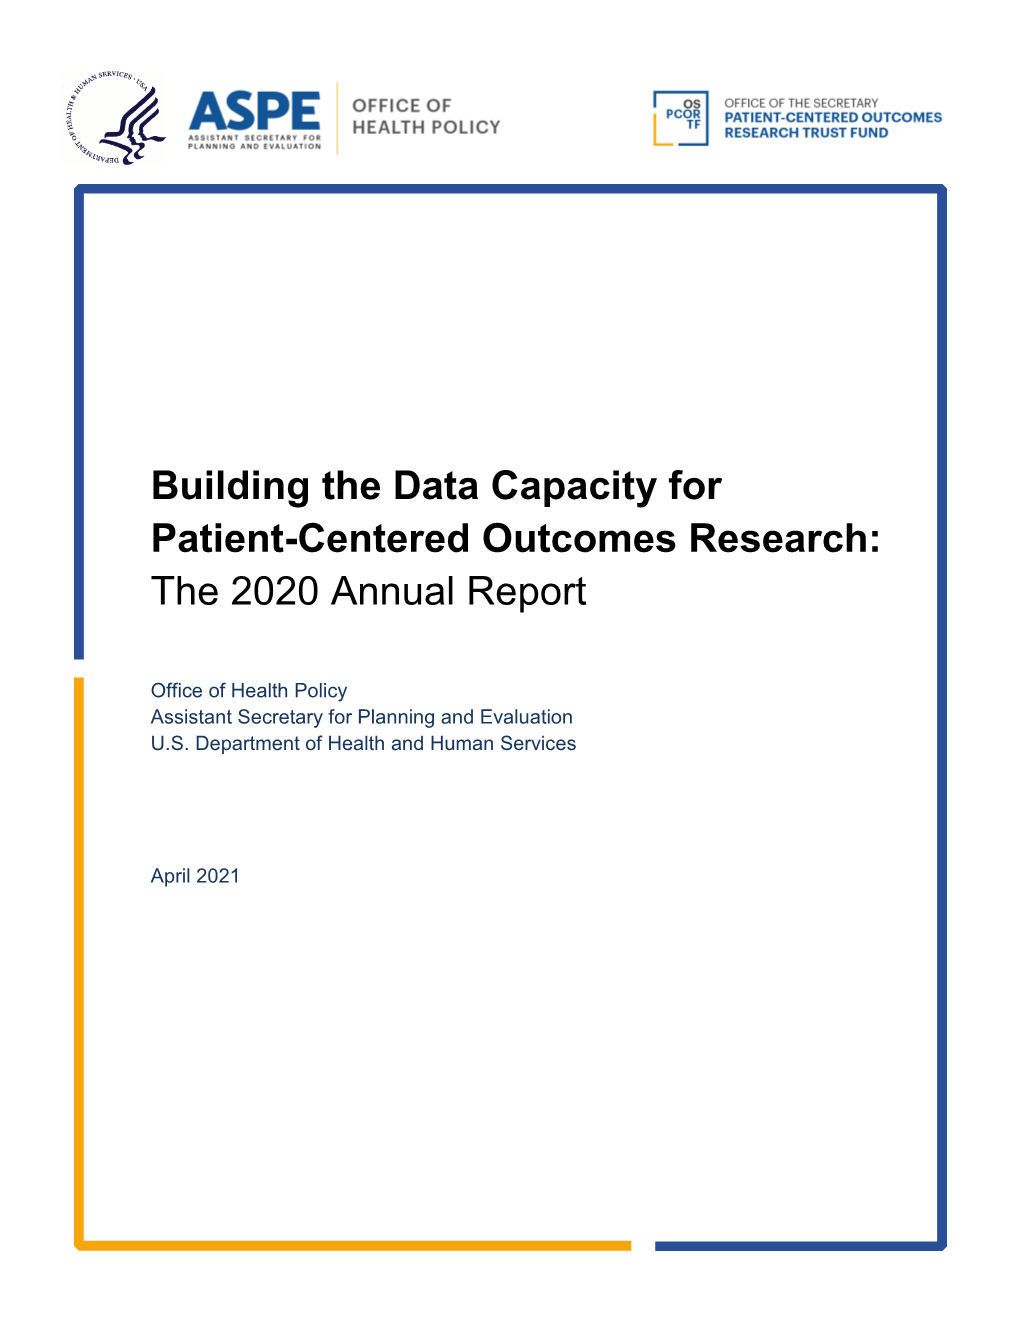 Building the Data Capacity for Patient-Centered Outcomes Research: the 2020 Annual Report